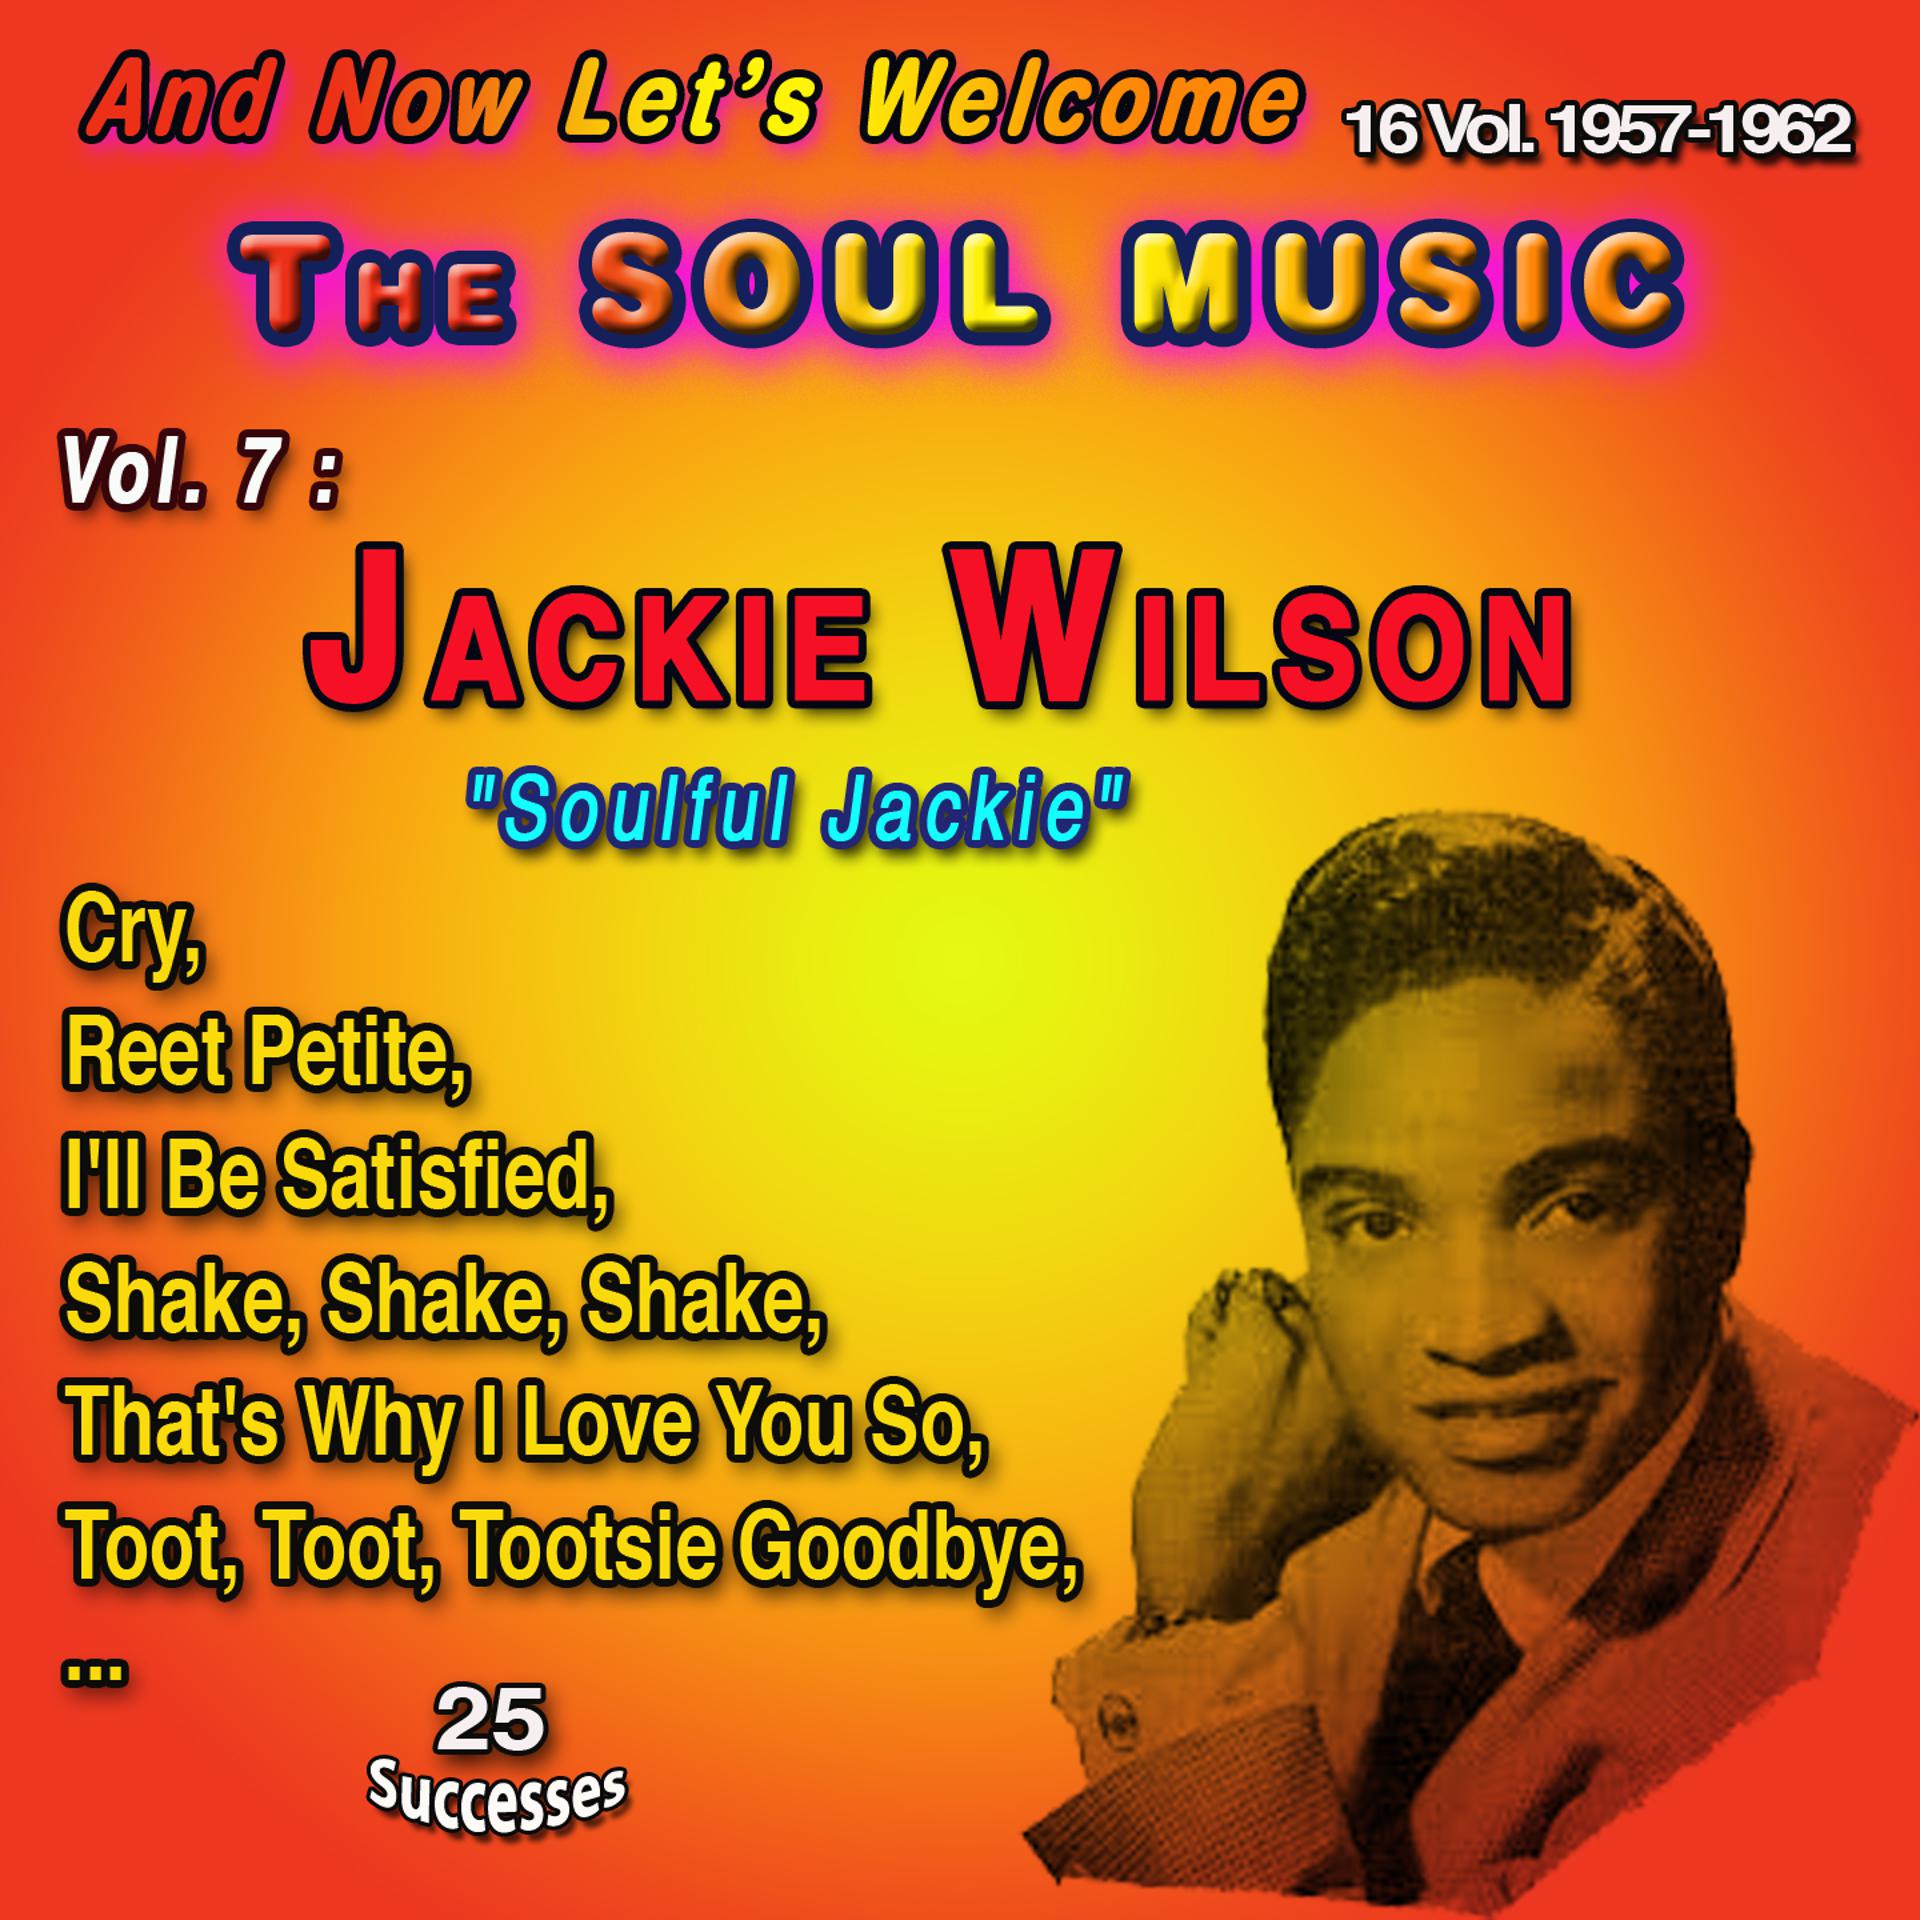 Постер альбома And Now Let's Welcome The Soul Music 16 Vol. 1957-1962 Vol. 7 : Jackie Wilson "Soulful Jackie"